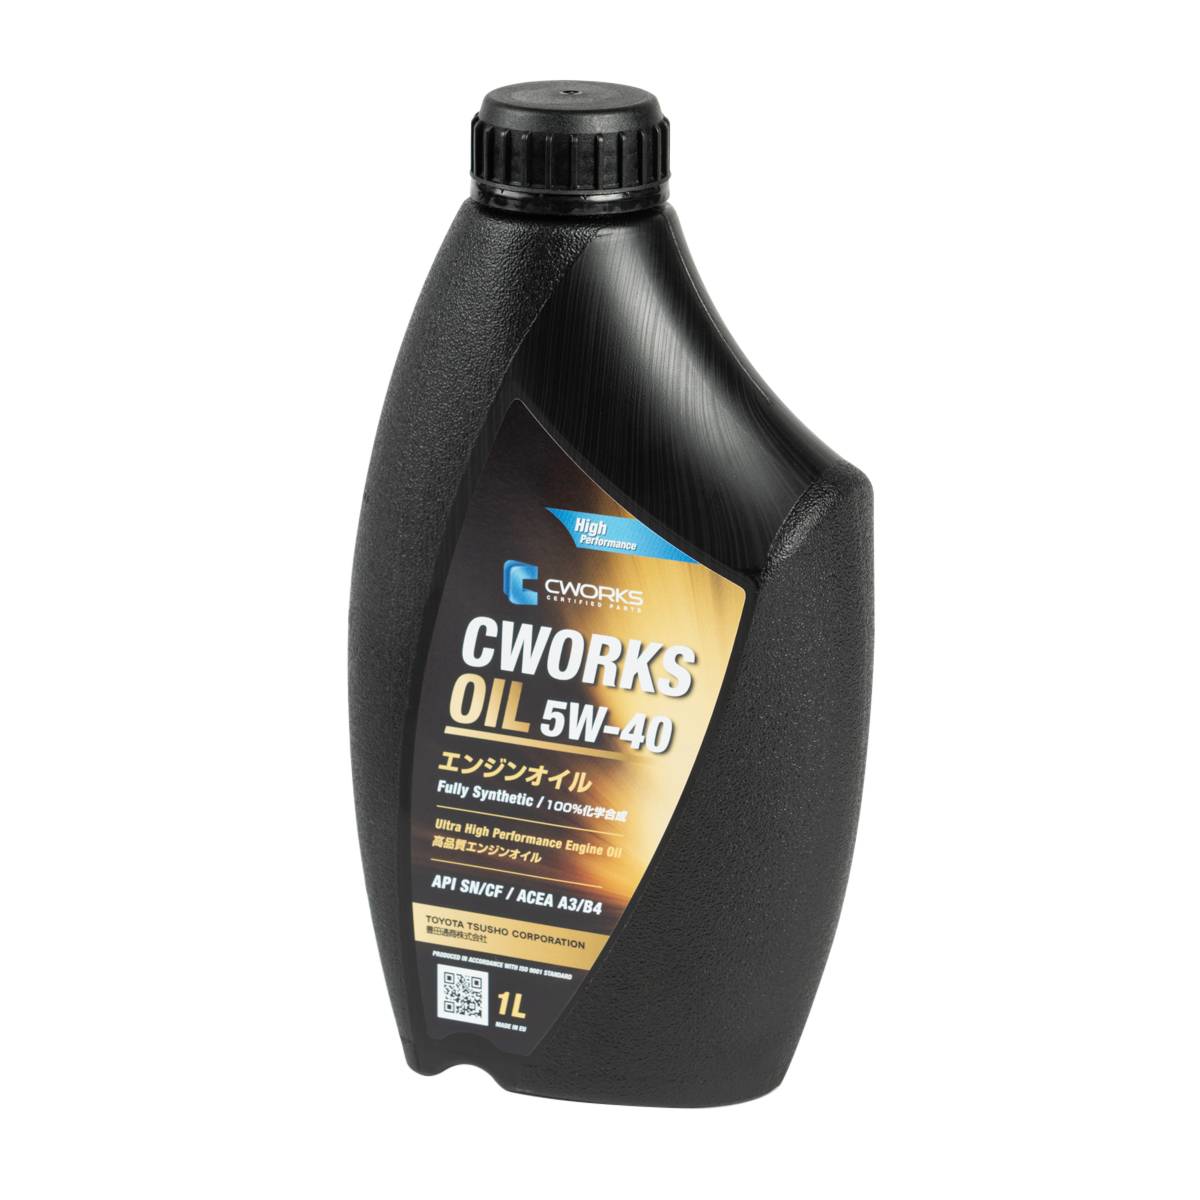 OIL 5w-40 a3/b4, 1L Масло моторное - CWORKS A130R3001